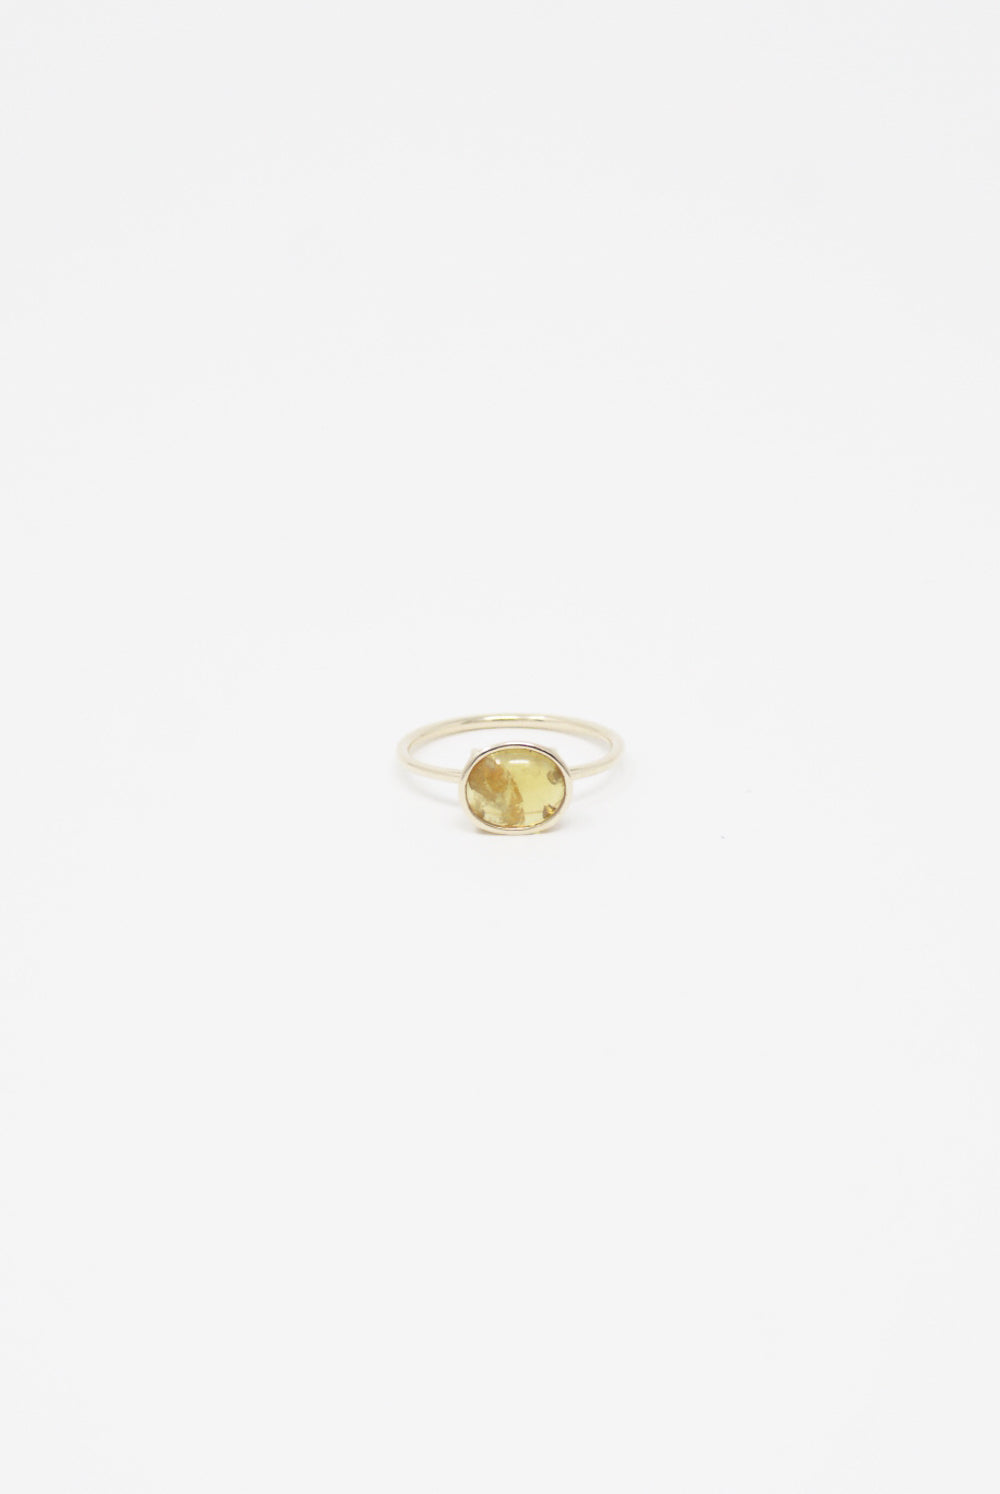 Mary MacGill - 14K Floating Ring in Yellow Tourmaline size 7 front view